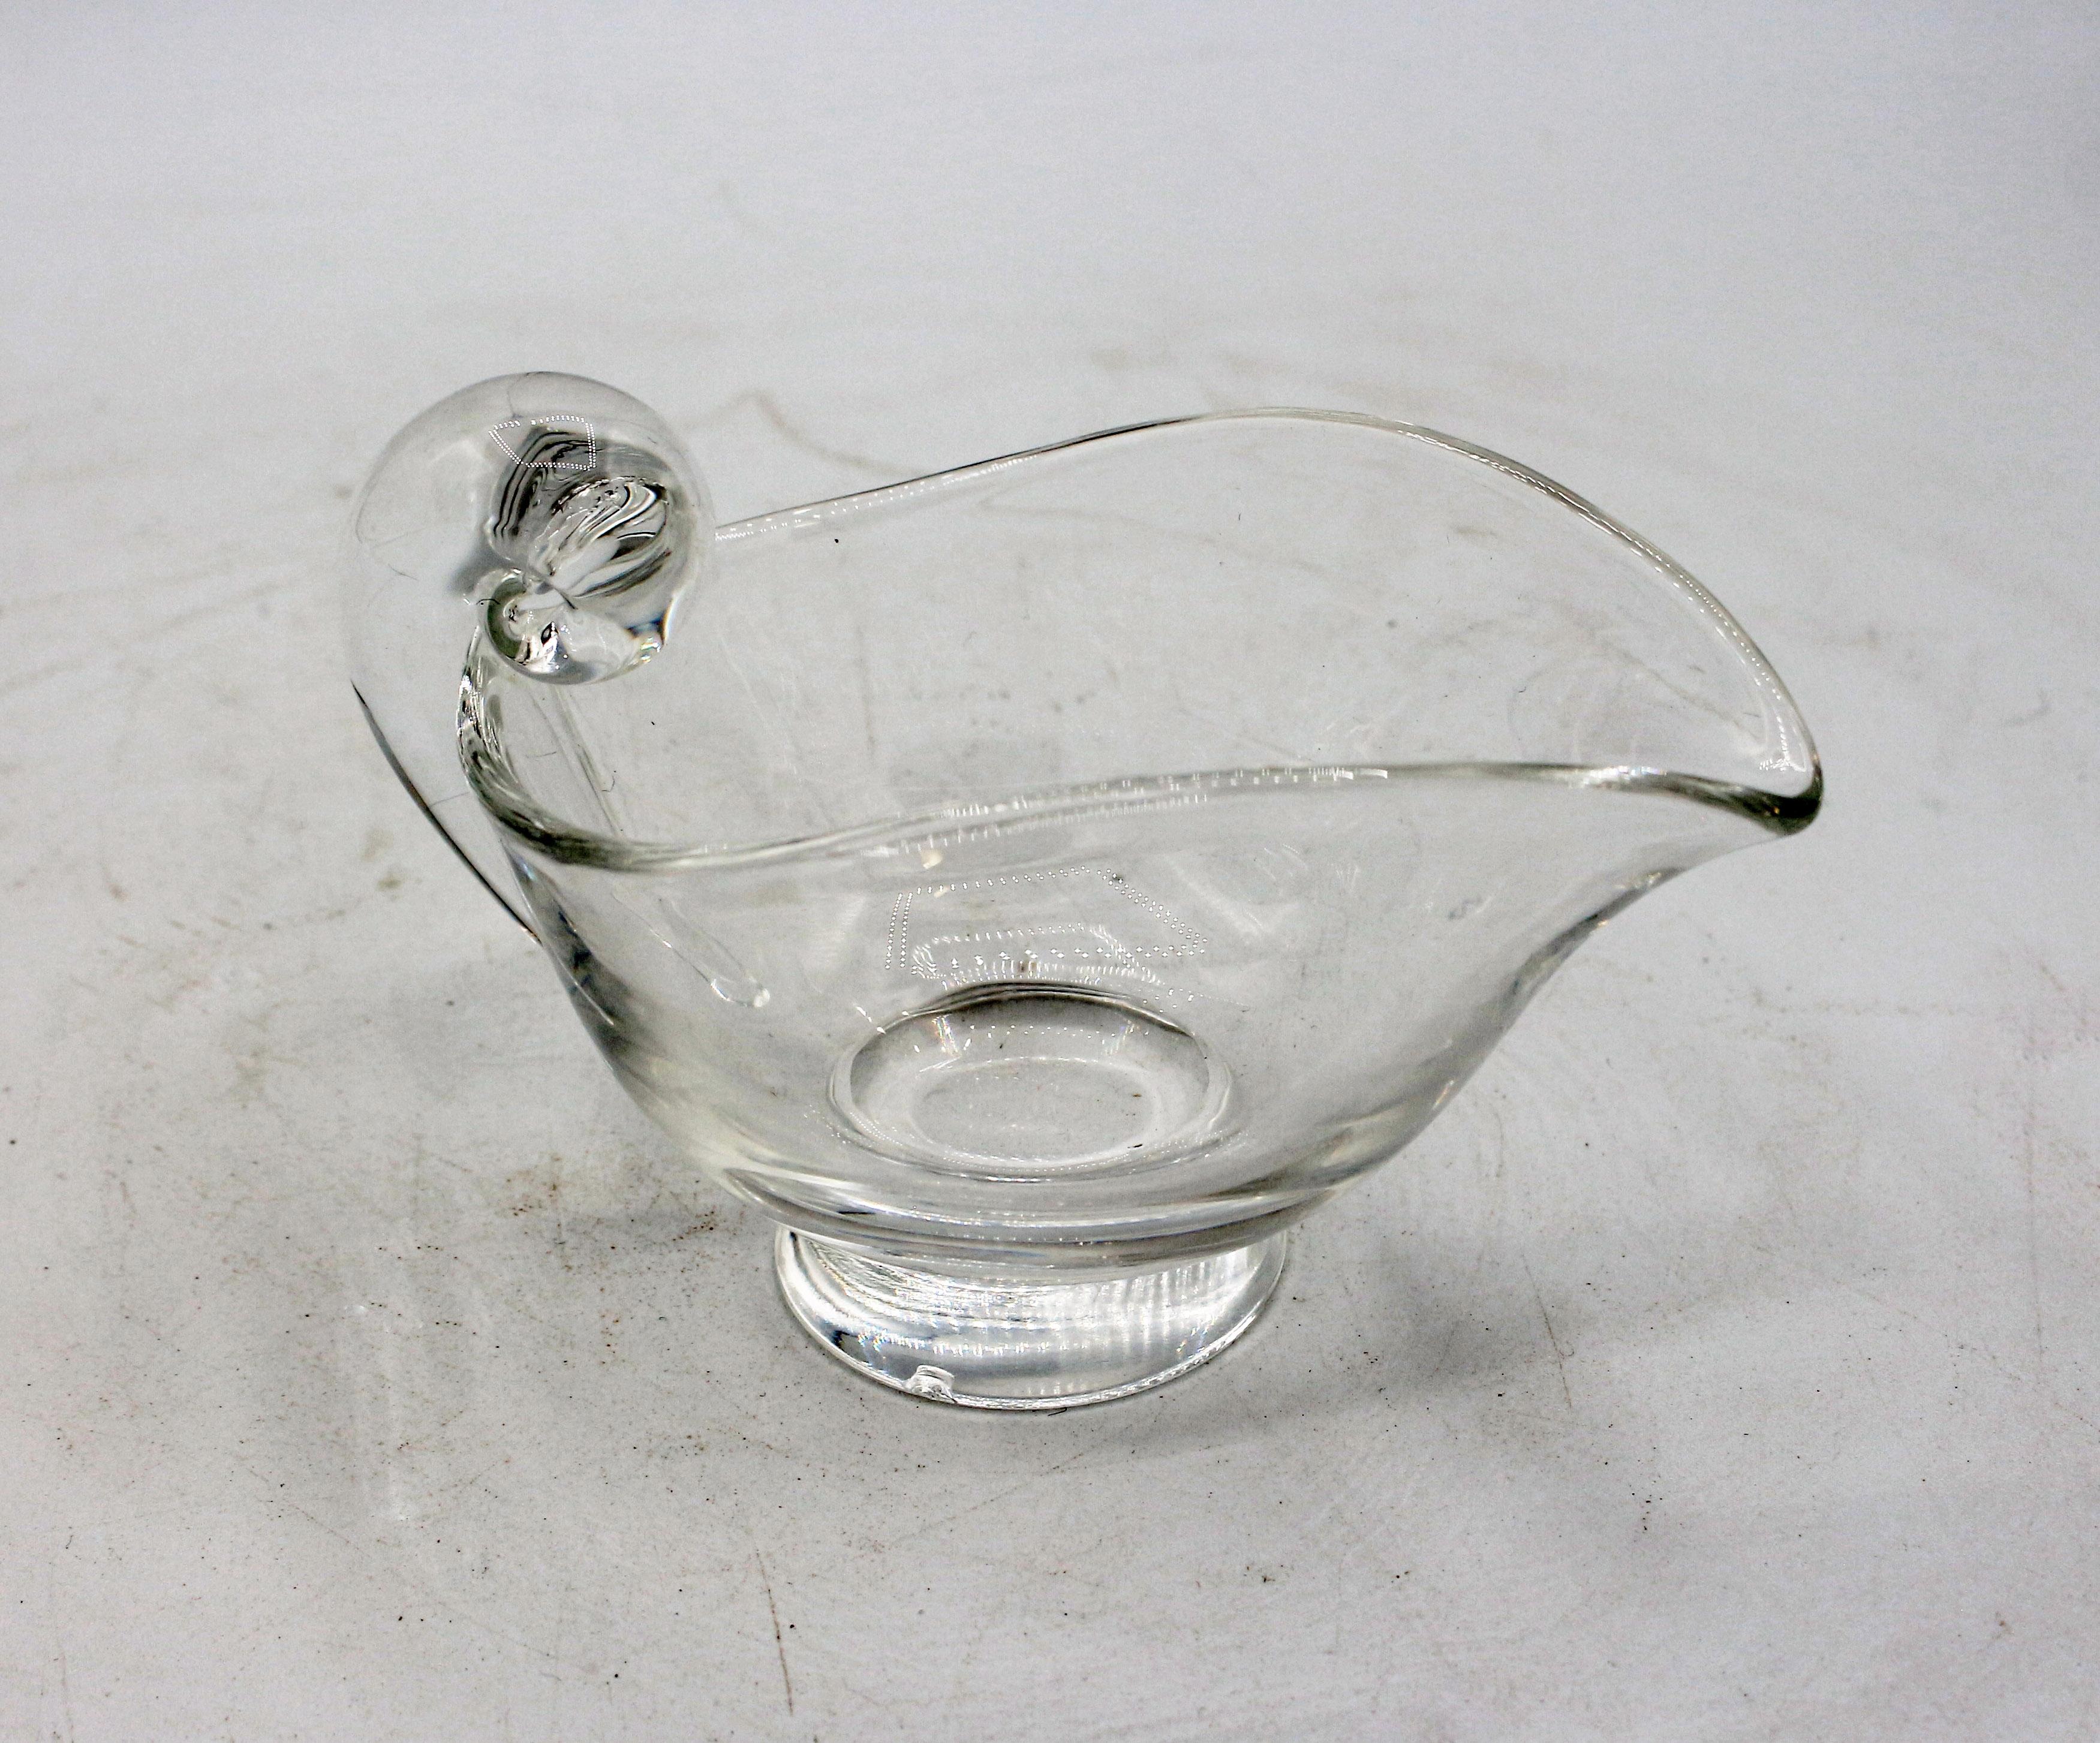 Mid century modern glass snail scroll cream & sugar by Steuben. Designed in 1947 by Irene Benton. Etched 